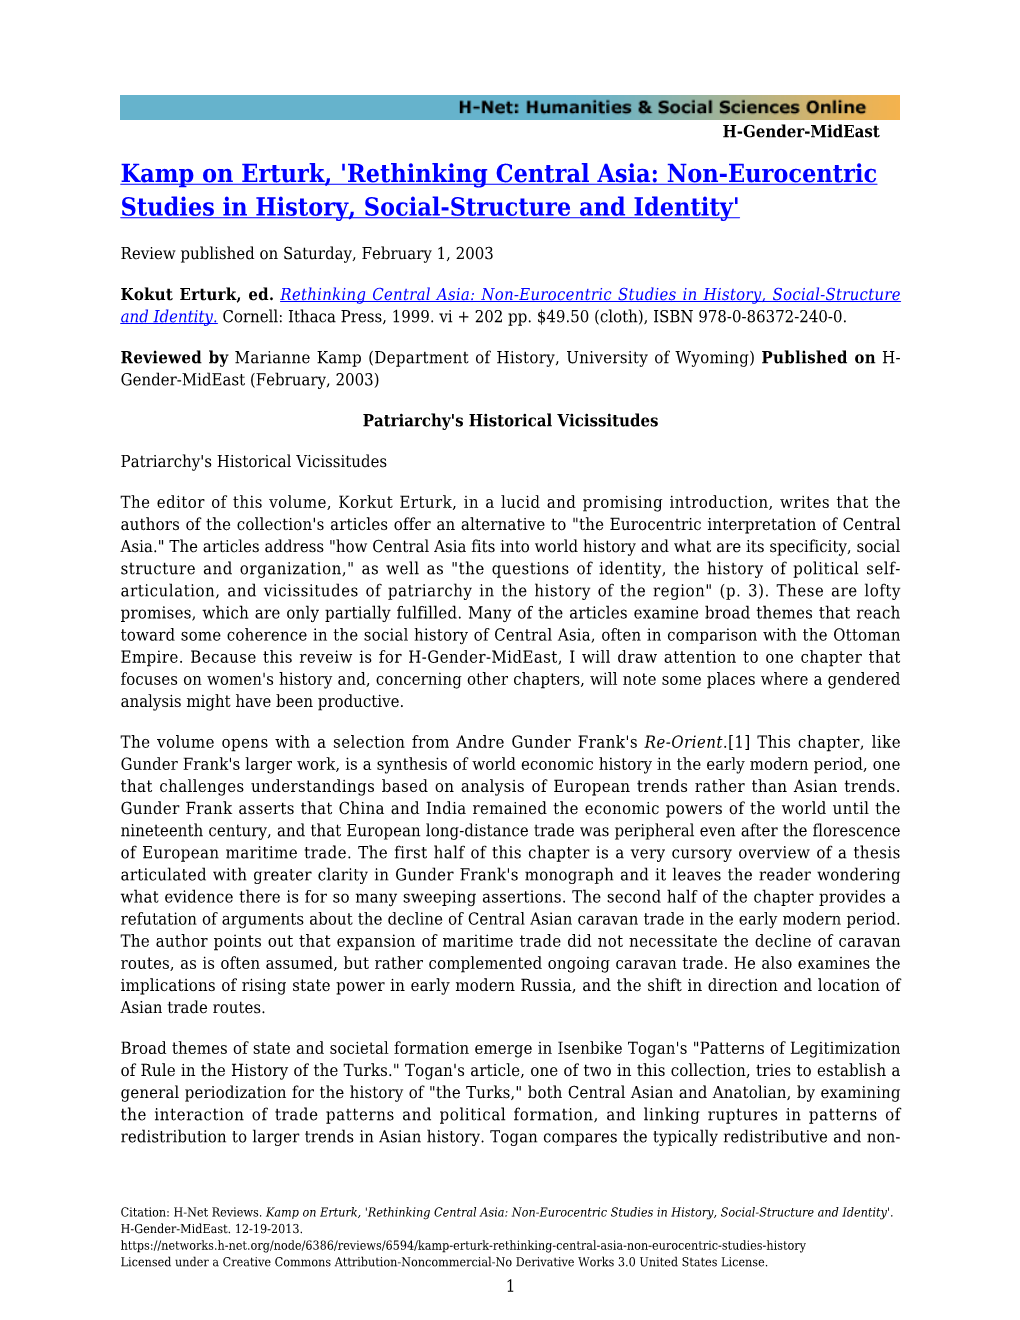 Rethinking Central Asia: Non-Eurocentric Studies in History, Social-Structure and Identity'